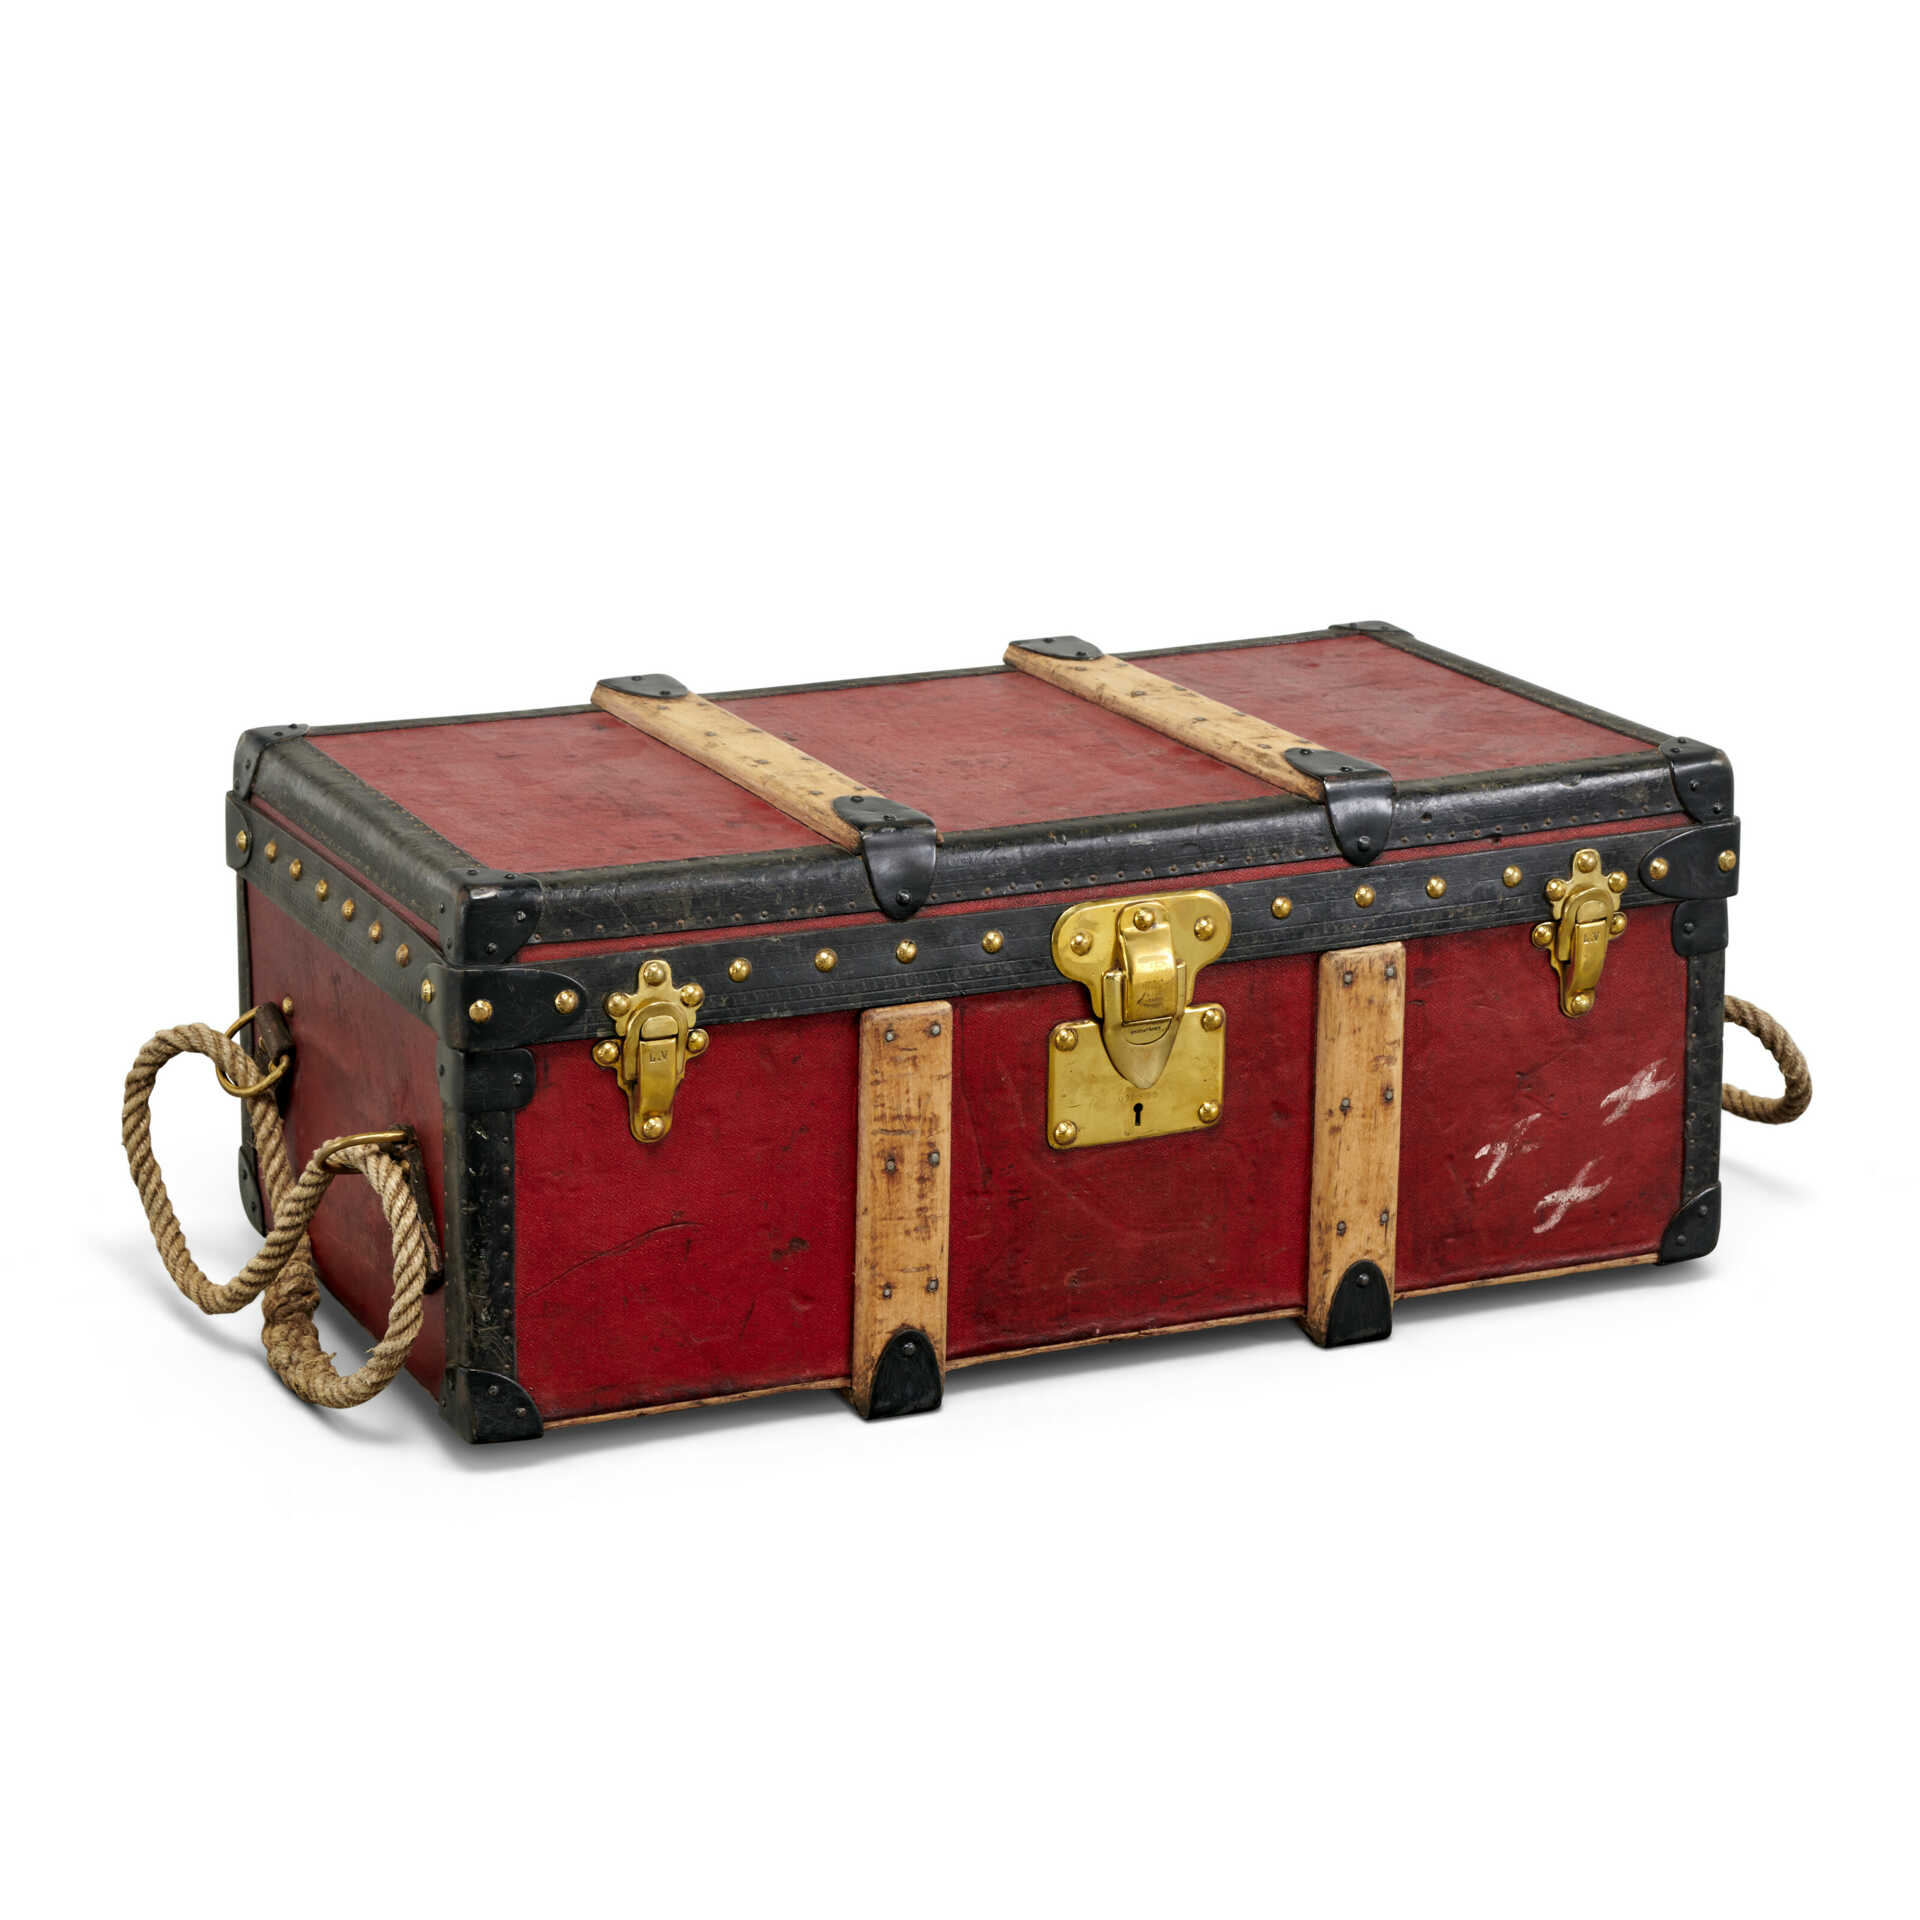 A RED VUITTONITE CANVAS TRUNK WITH BRASS HARDWARE